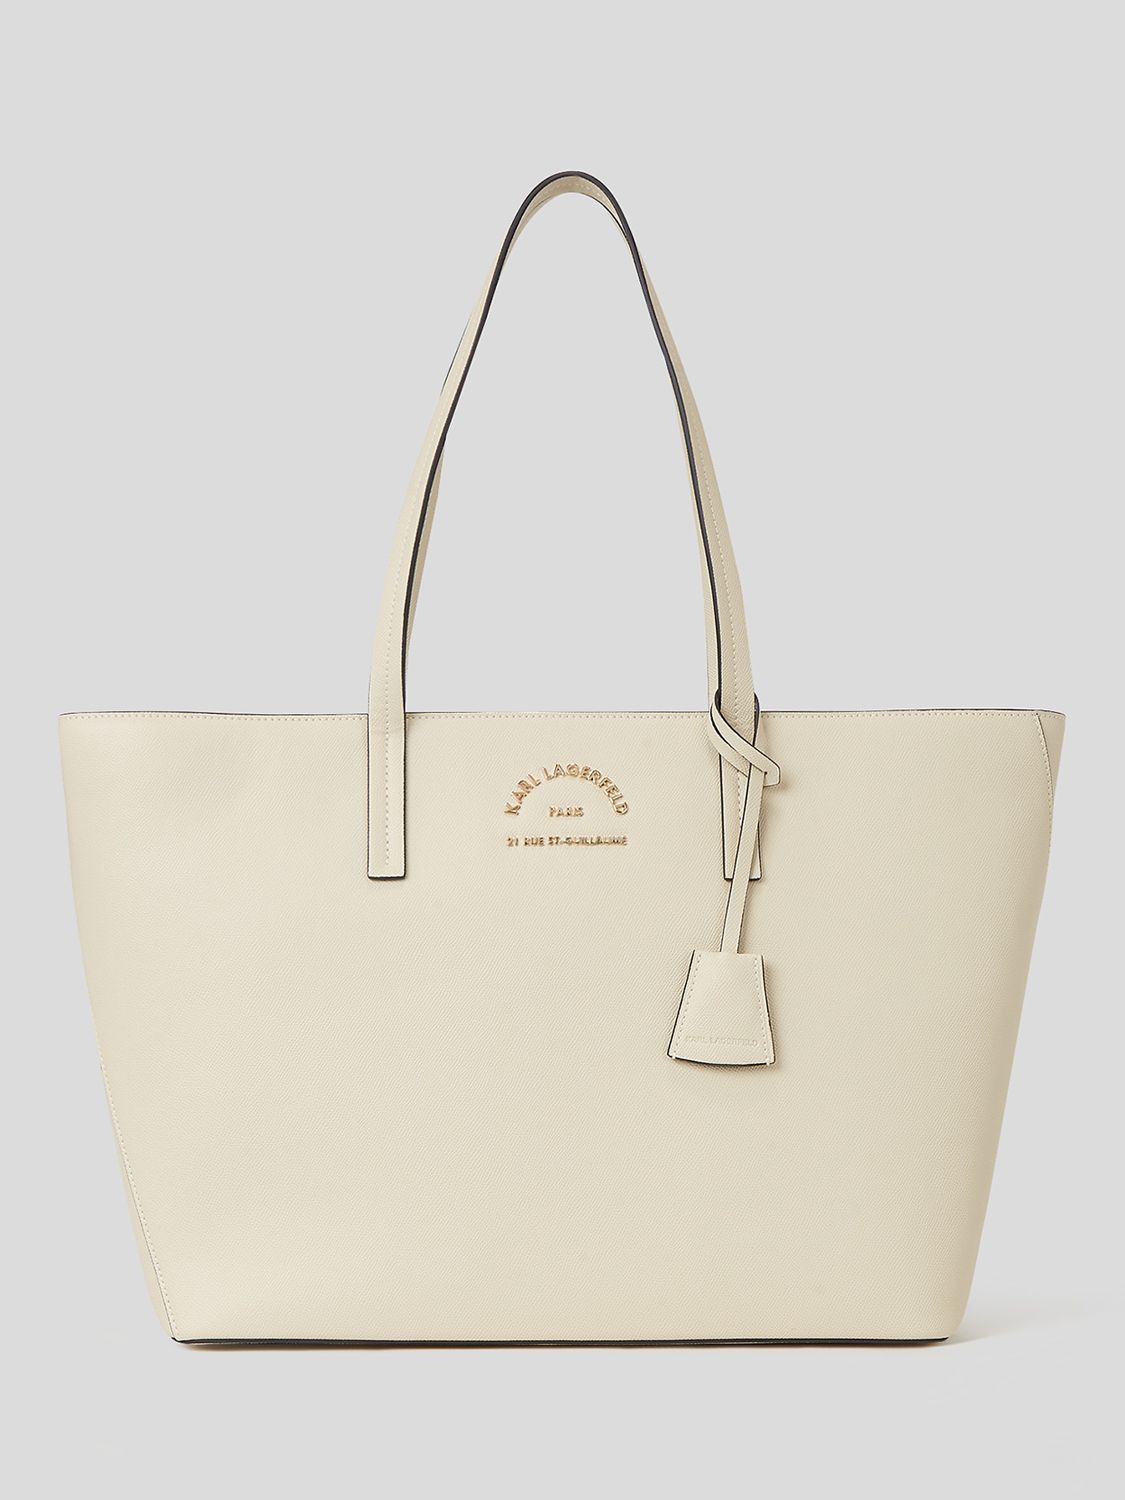 KARL LAGERFELD Rue St-Guillaume Large Tote Bag, Off White, One Size